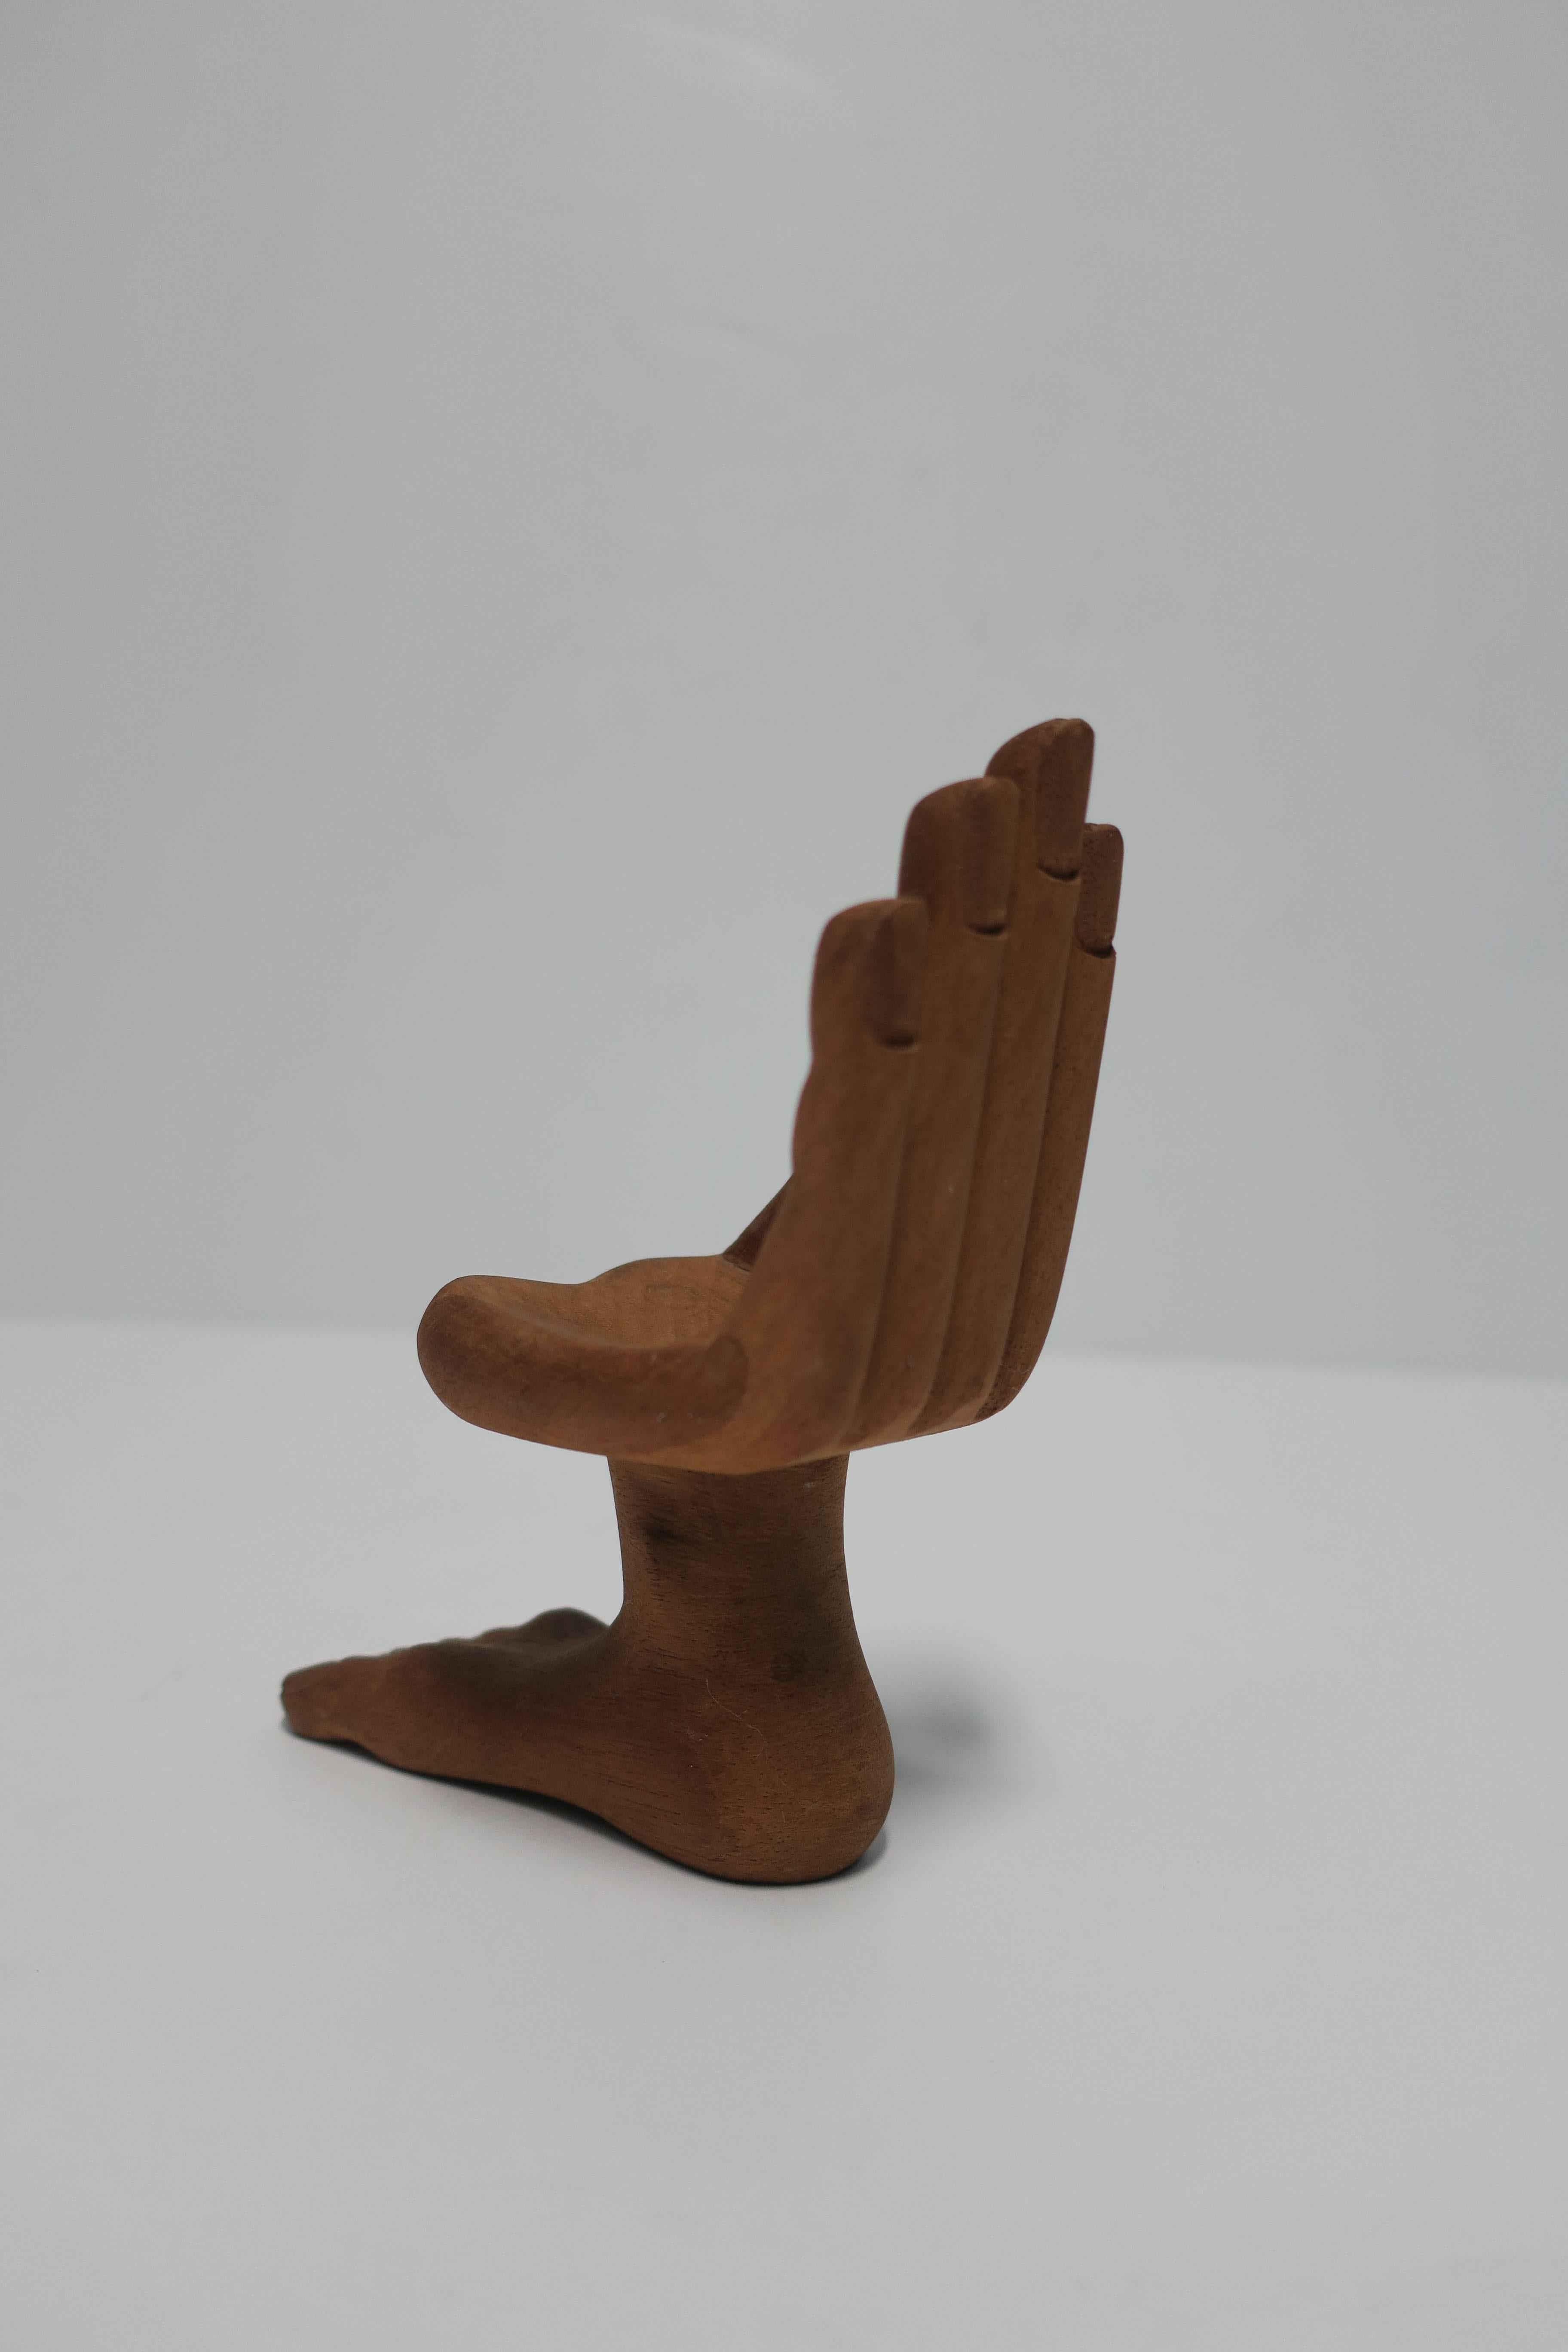 20th Century Pedro Friedeberg Hand Chair Decorative Object Sculpture